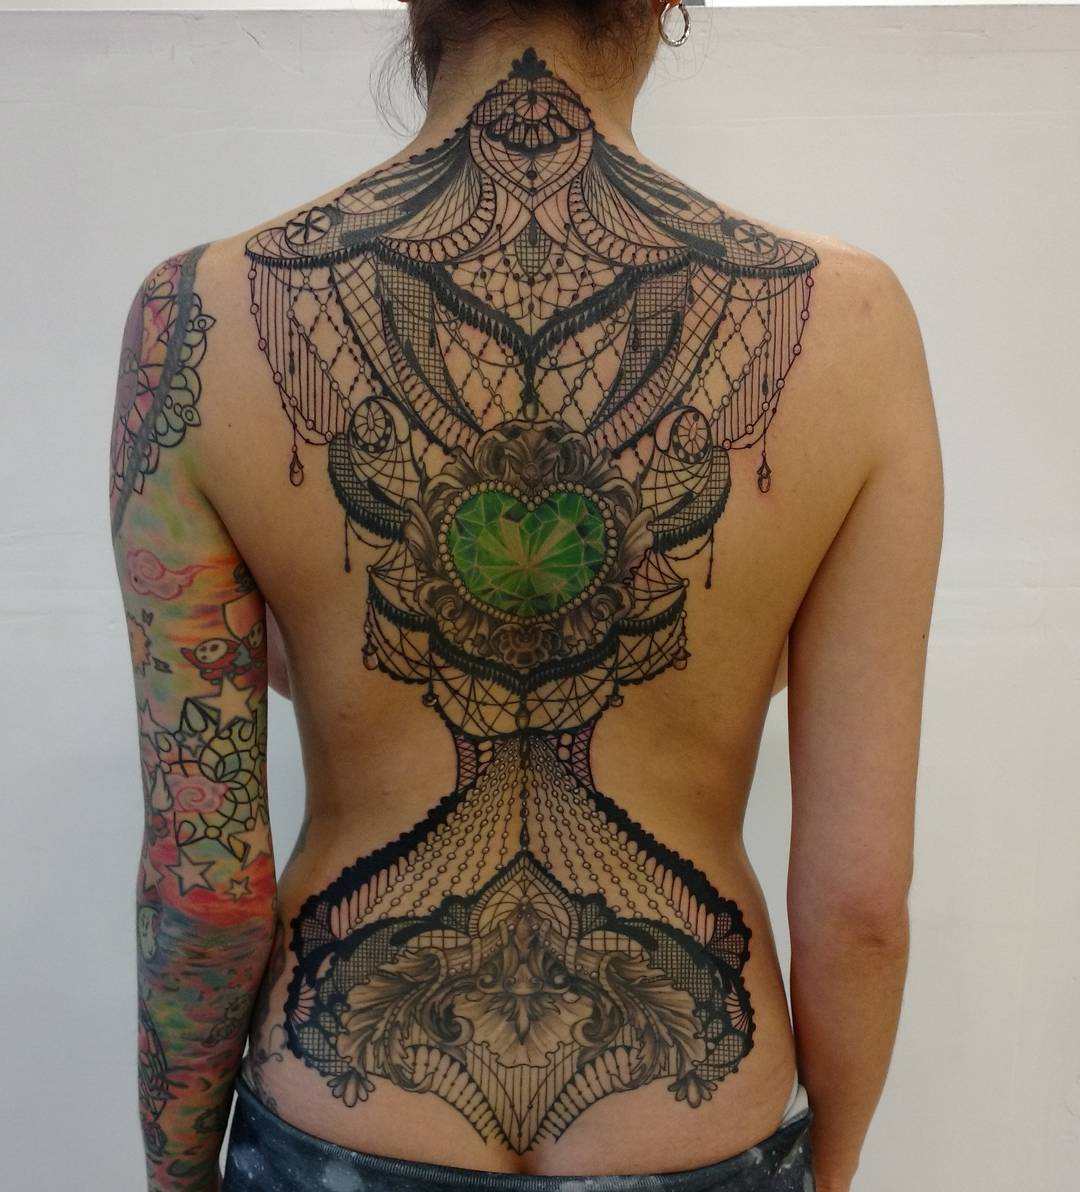 Choosing Your Lace Tattoo.